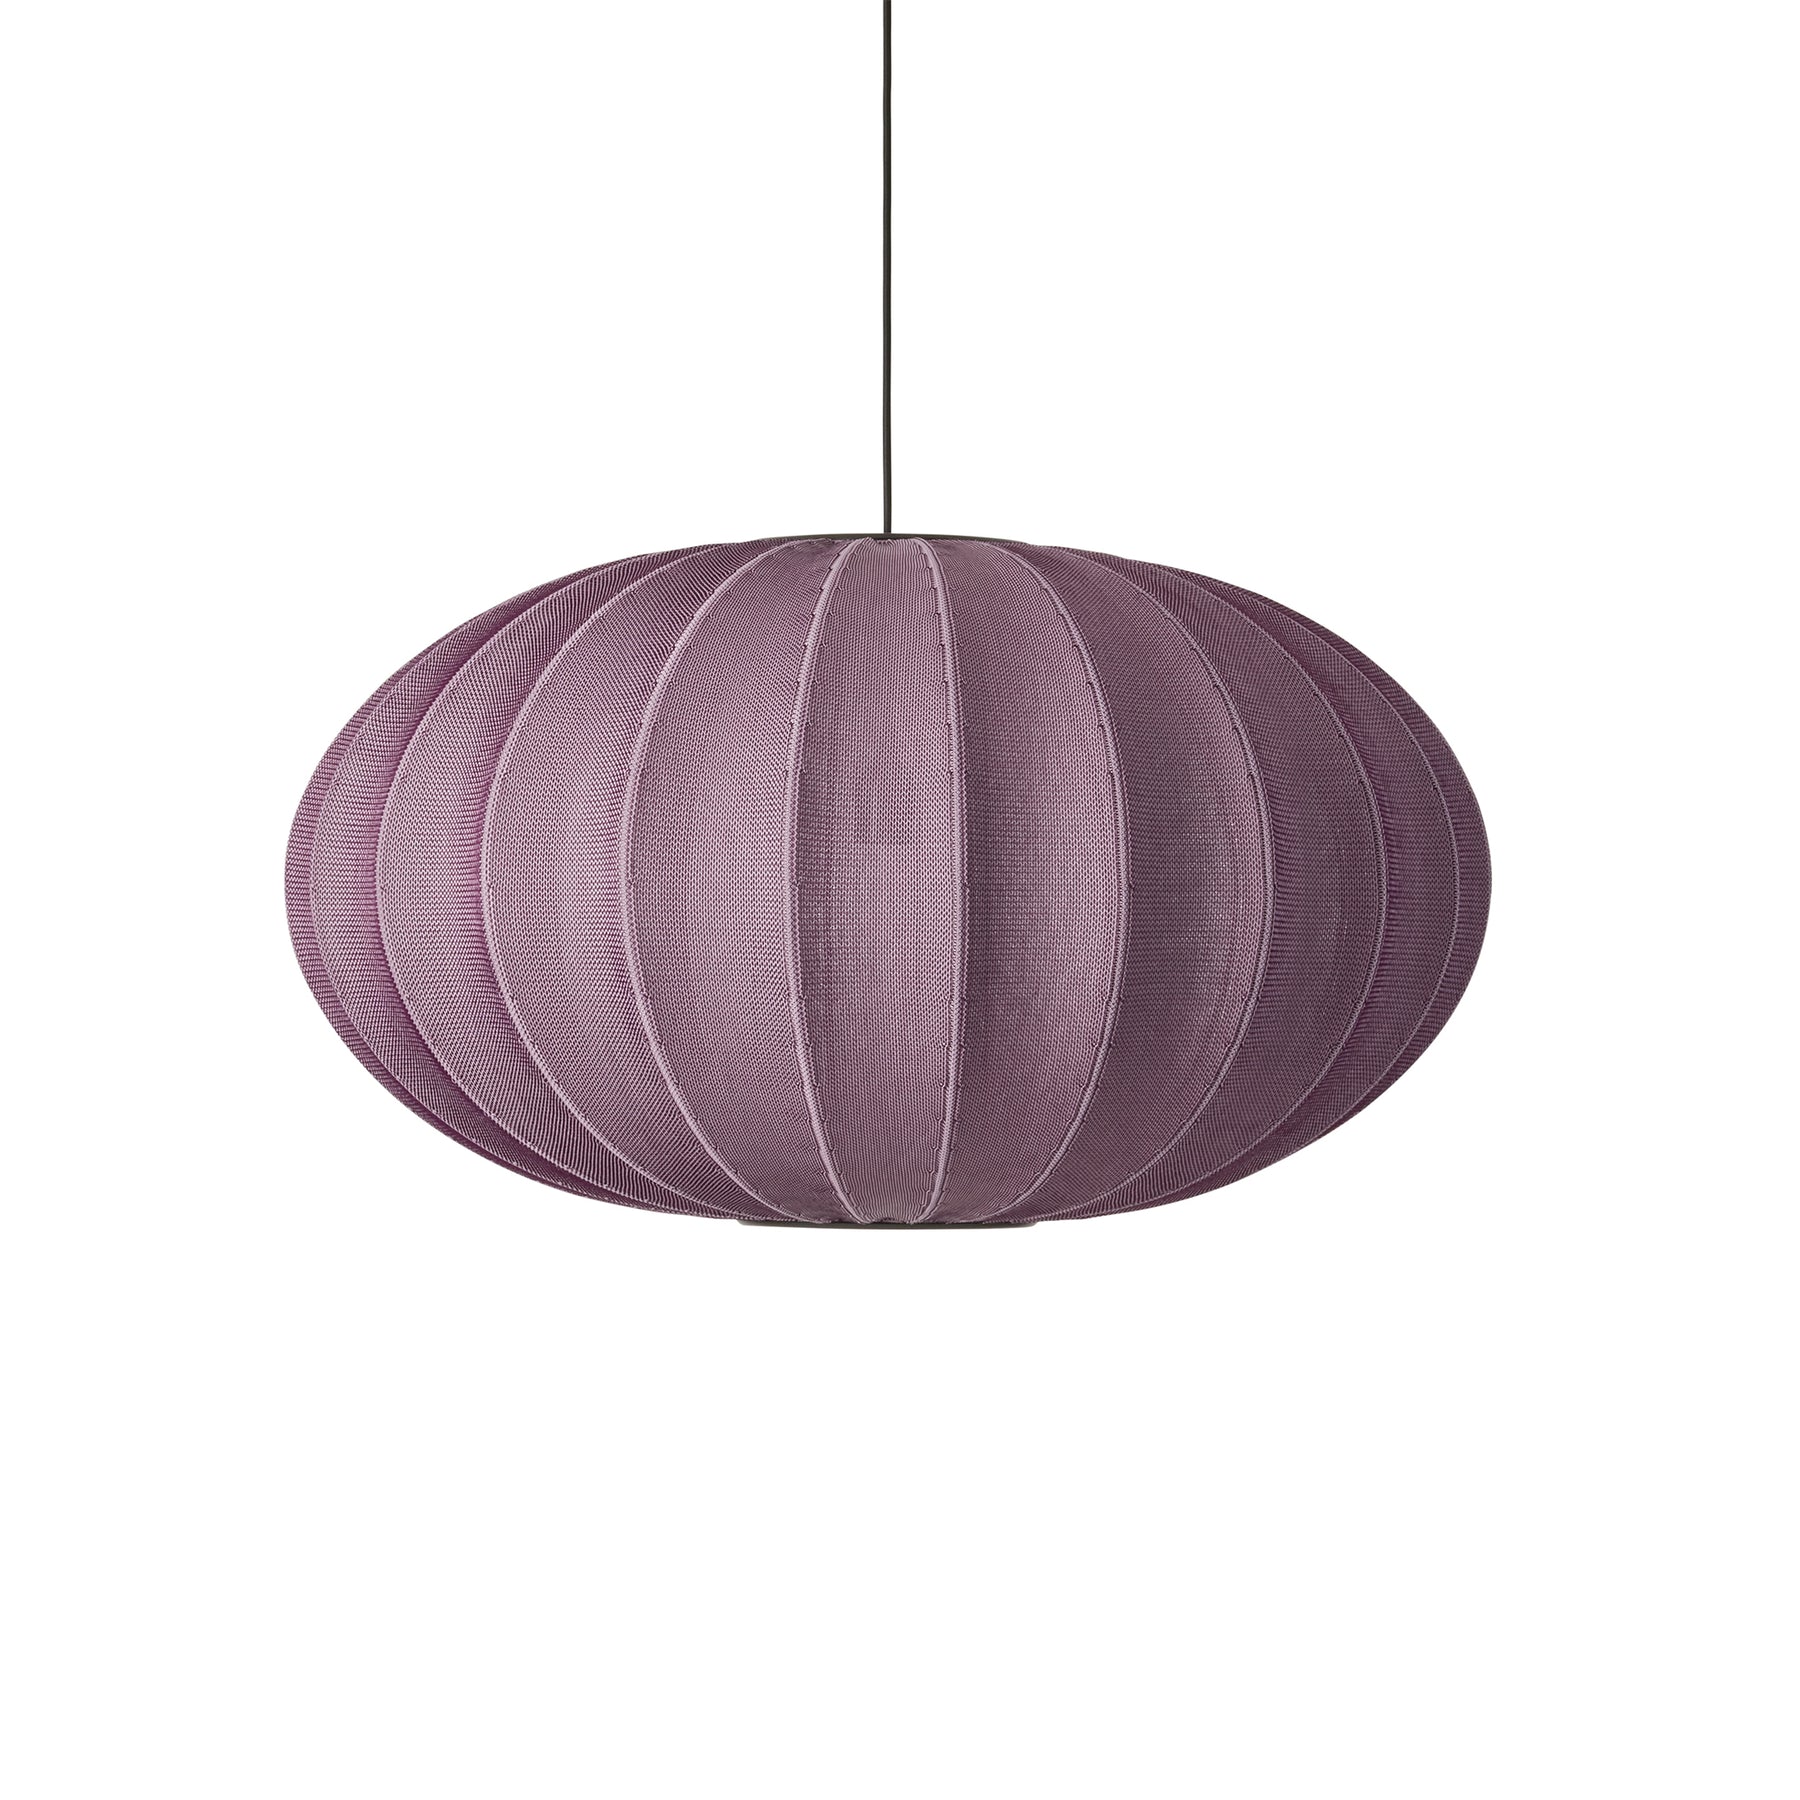 Made by Hand, Knit-Wit Oval Pendant Lamp 76, Sandstone, Pendant,